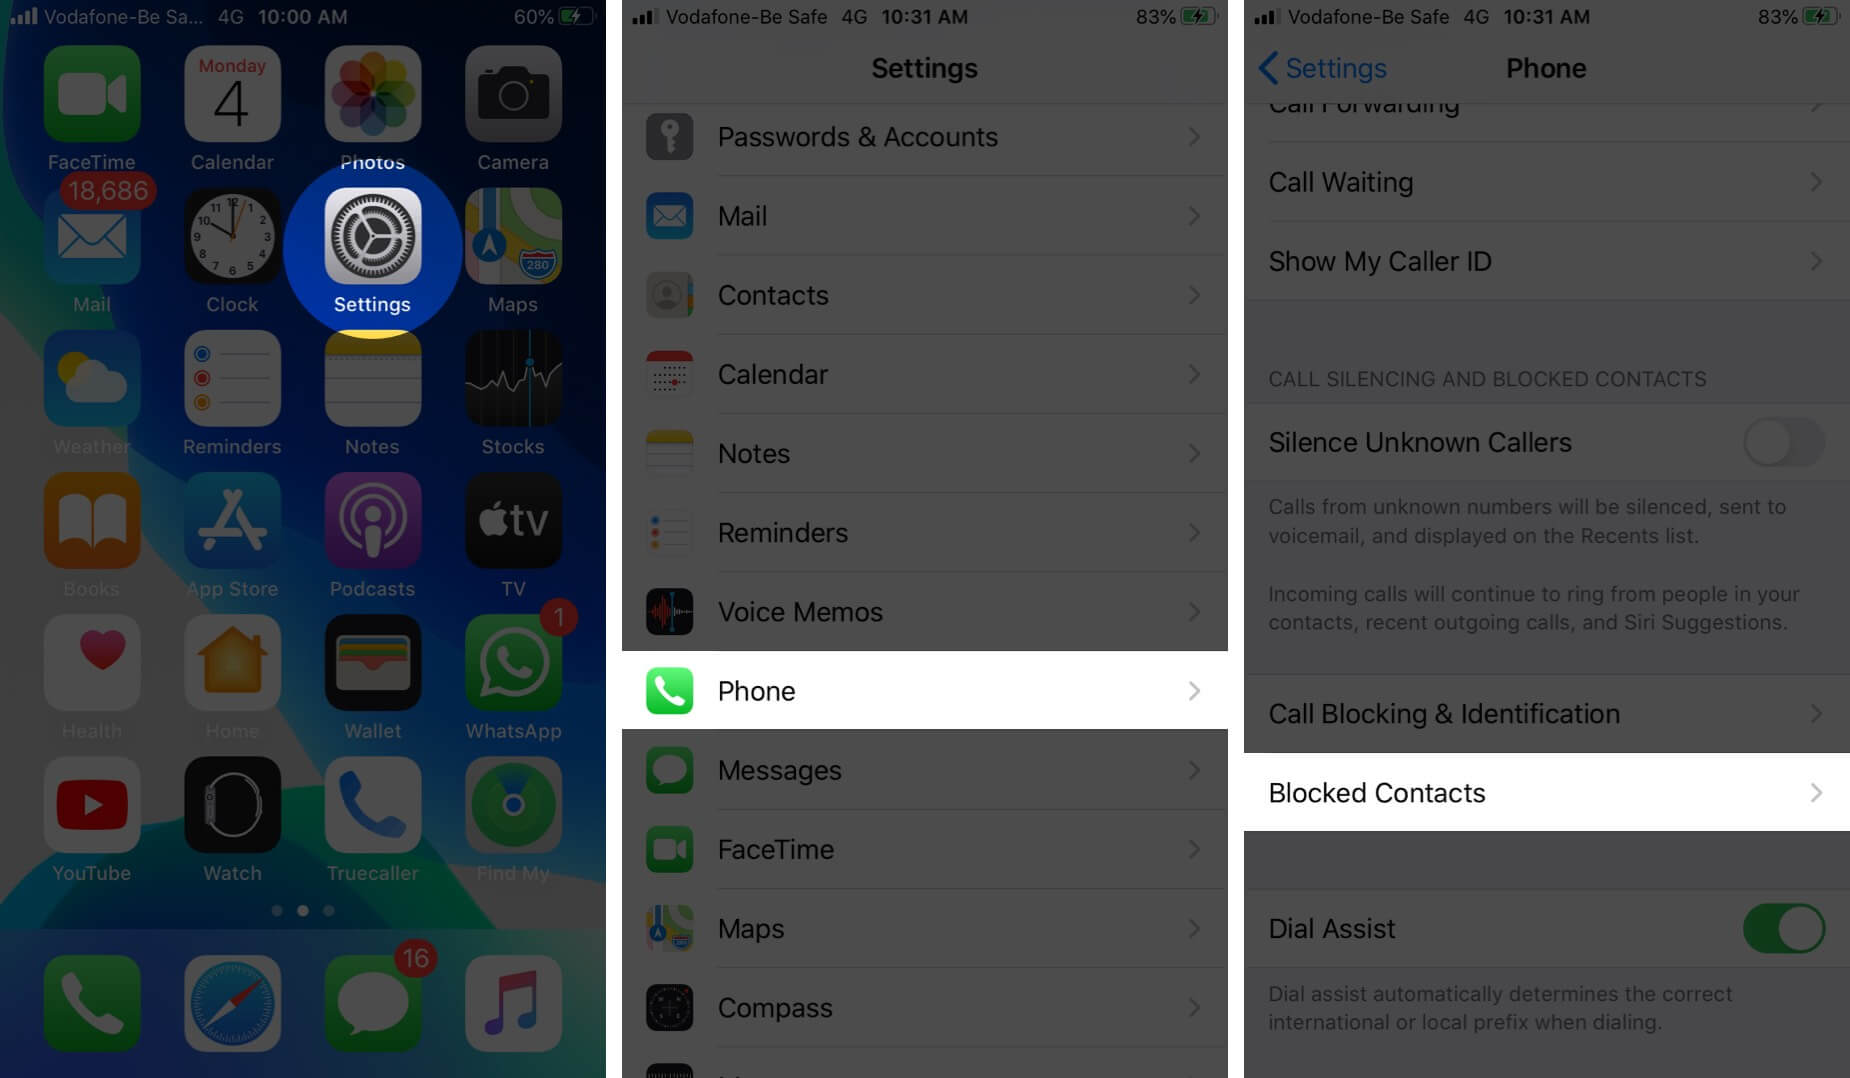 Open Settings Tap on Phone and Then Tap on Blocked Contacts